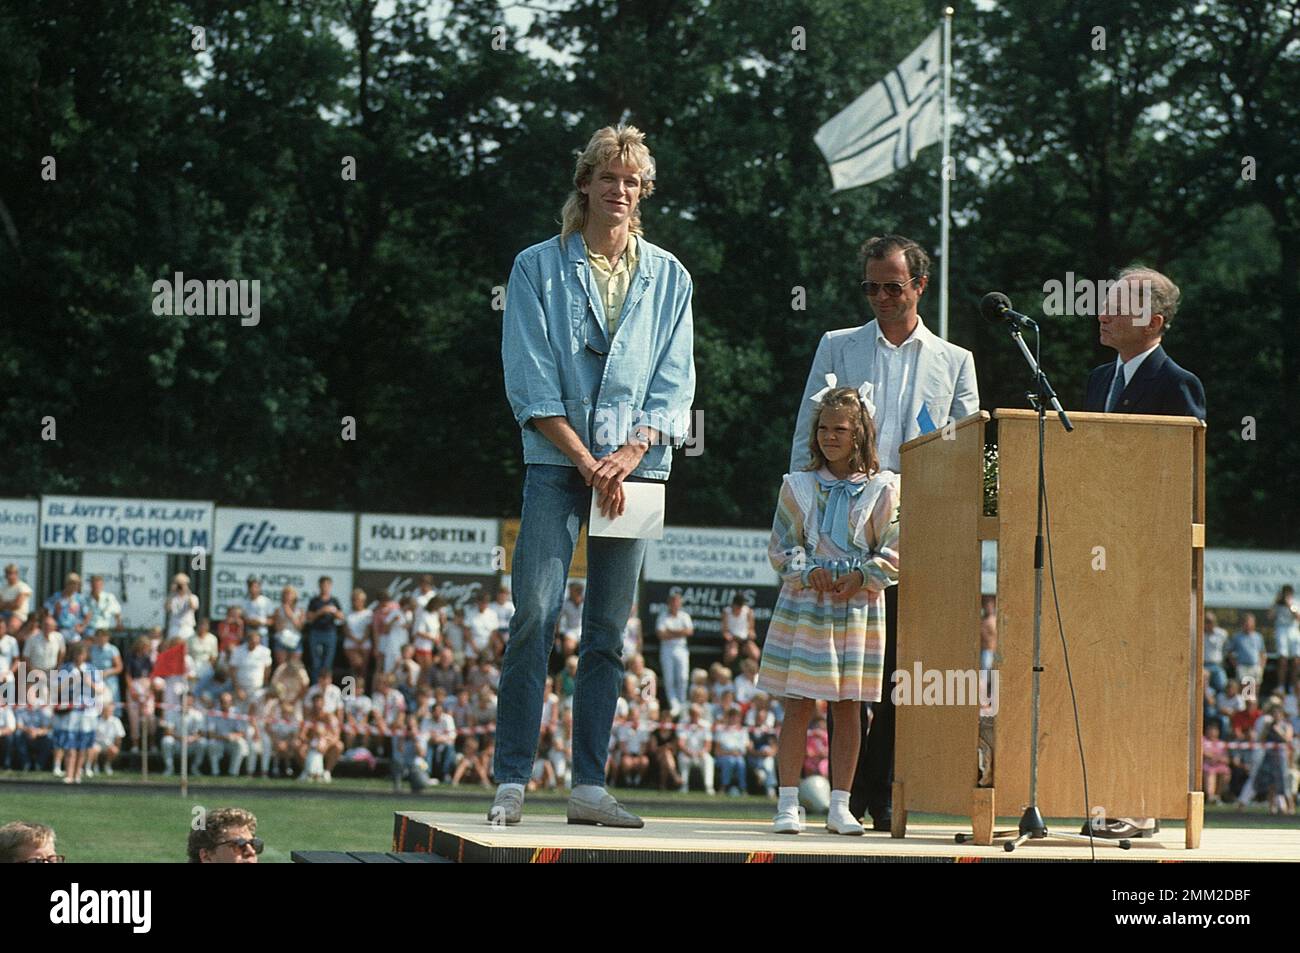 Carl XVI Gustaf, King of Sweden. Born 30 april 1946.  The King Carl XVI Gustaf and his daughter crown princess Victoria on Victoriaday 14 july 1985. Patrik Sjöberg who recieved the Victoria Award this year to the left. Stock Photo